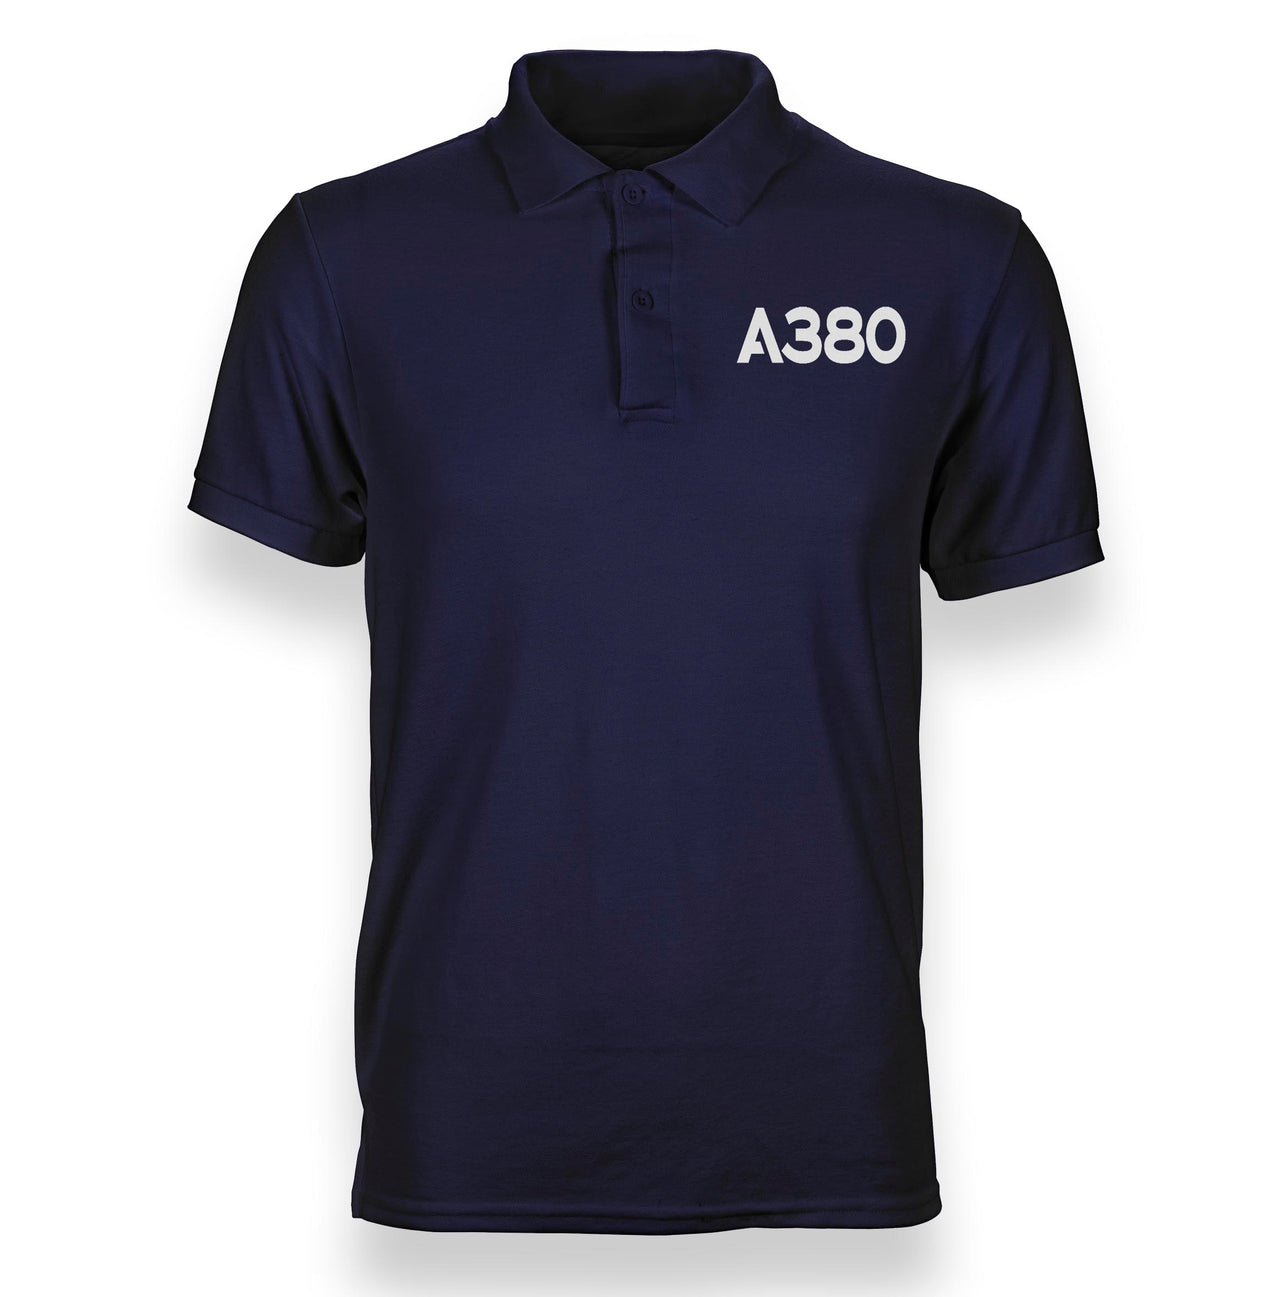 A380 Flat Text Designed Polo T-Shirts